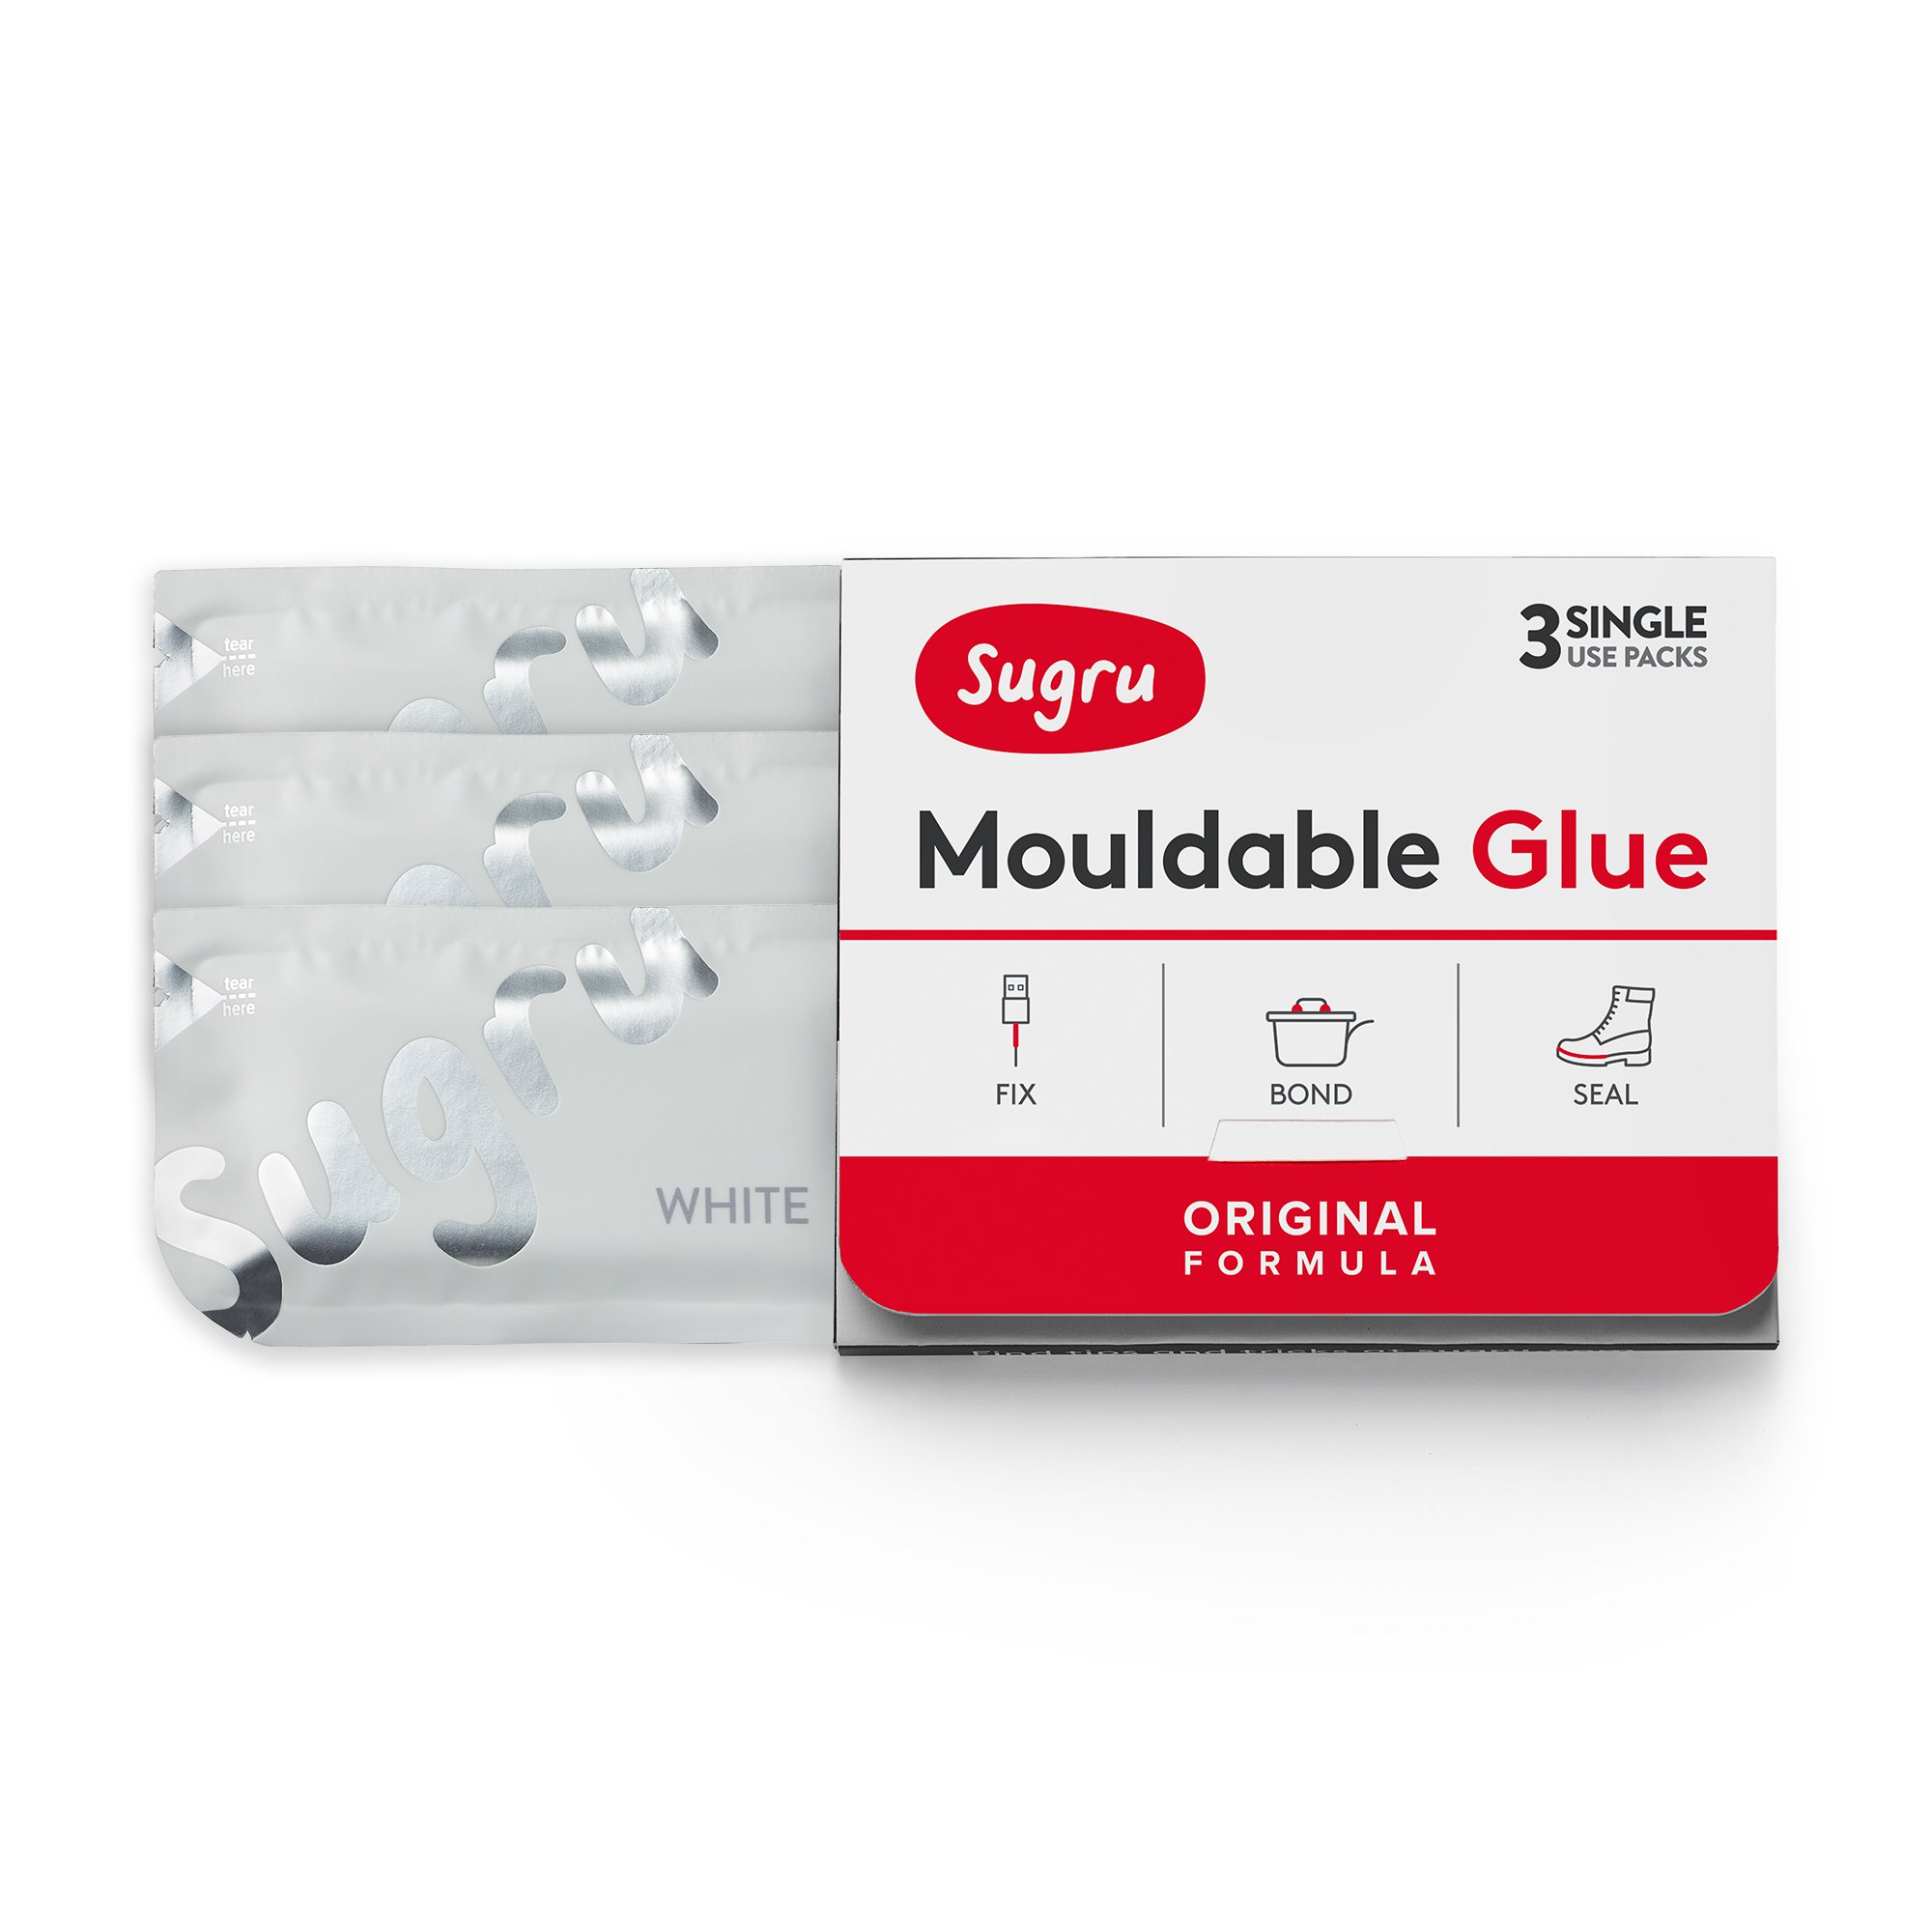 Sugru Moldable Glue - Original Formula - All-Purpose Adhesive, Advanced  Silicone Technology - Holds up to 4.4 lb - White 3-Pack 